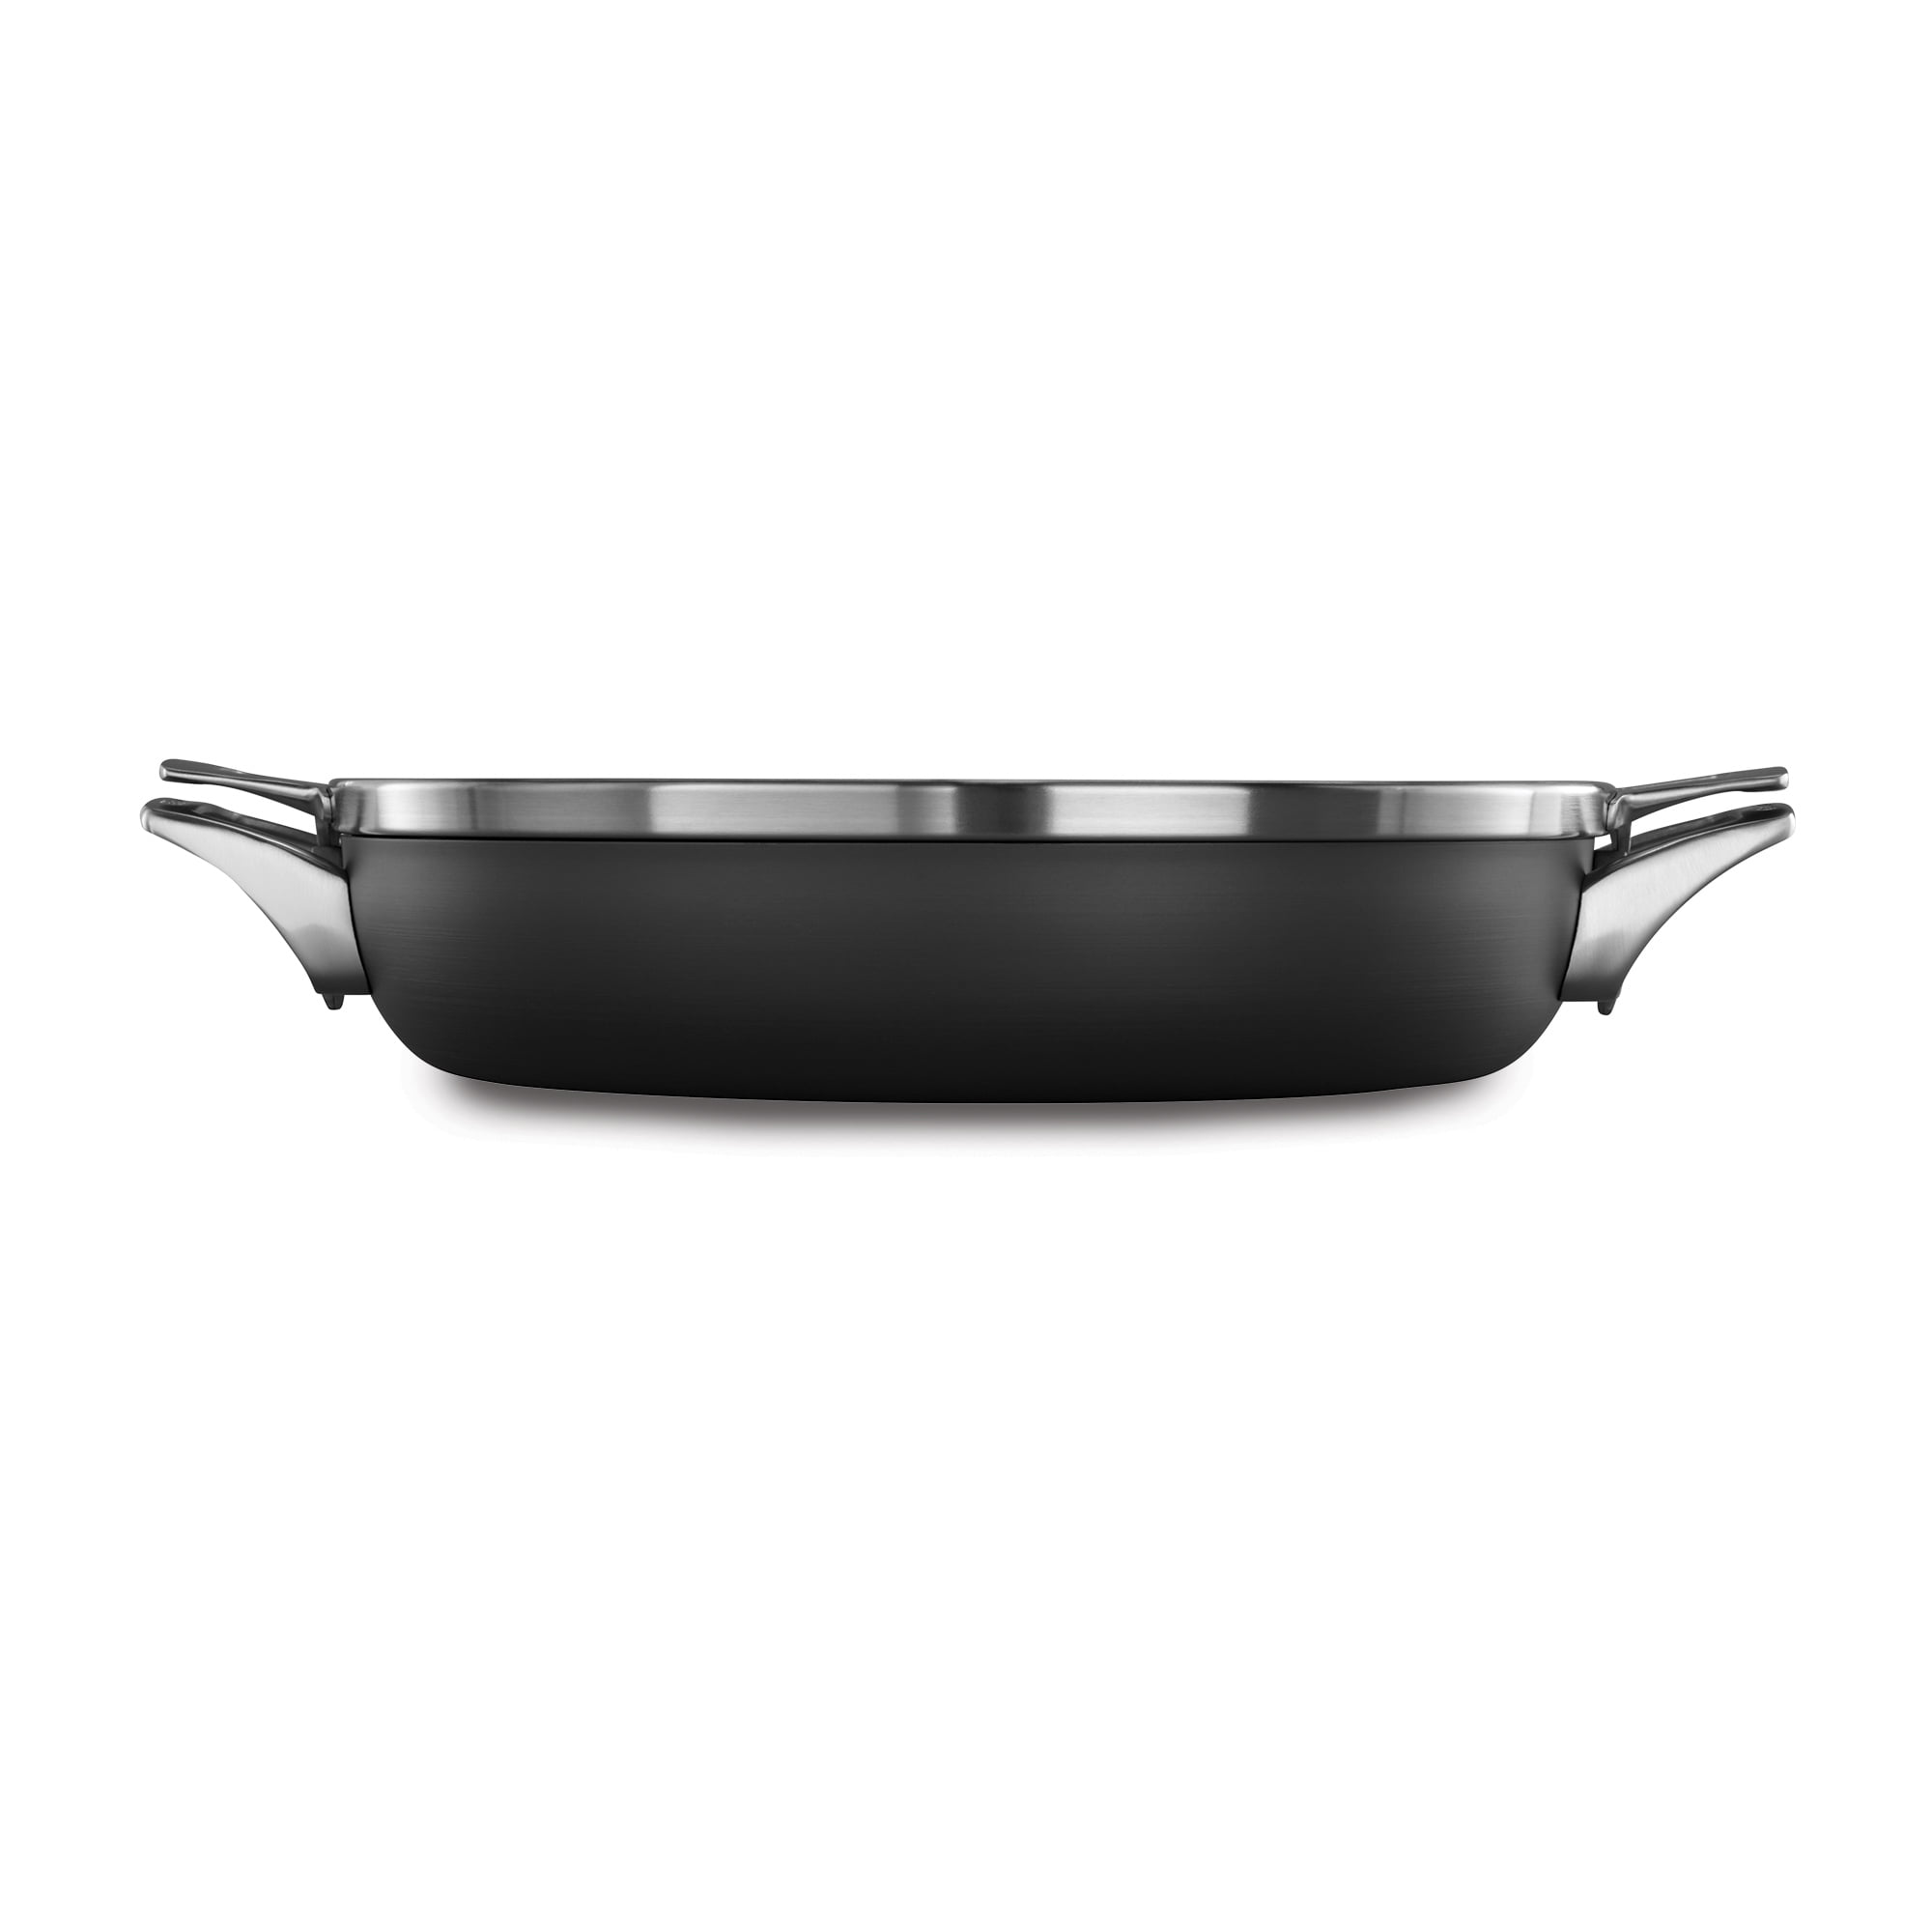 Evolve 12” Everyday Pan with Lid – Ecolution Cookware